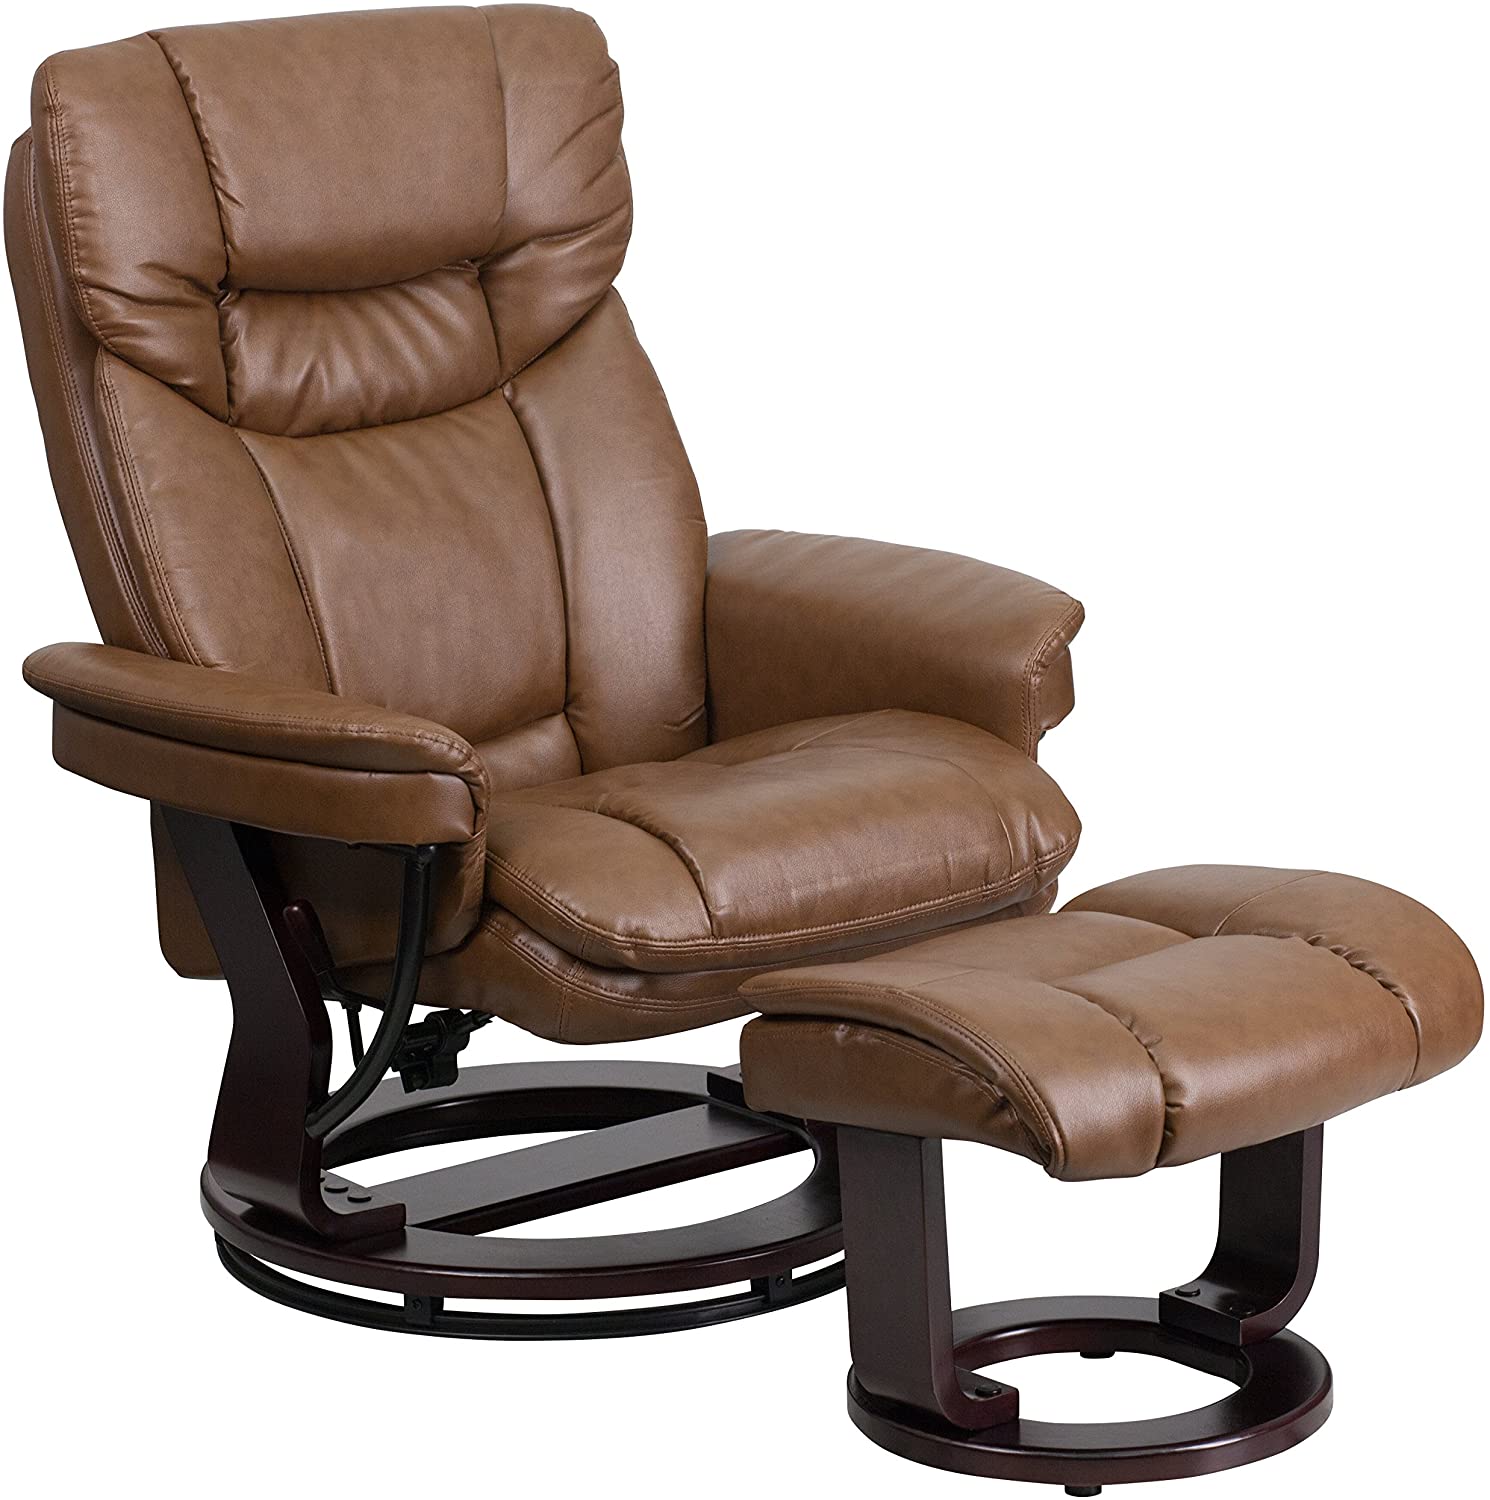 Flash furniture recliner for short person